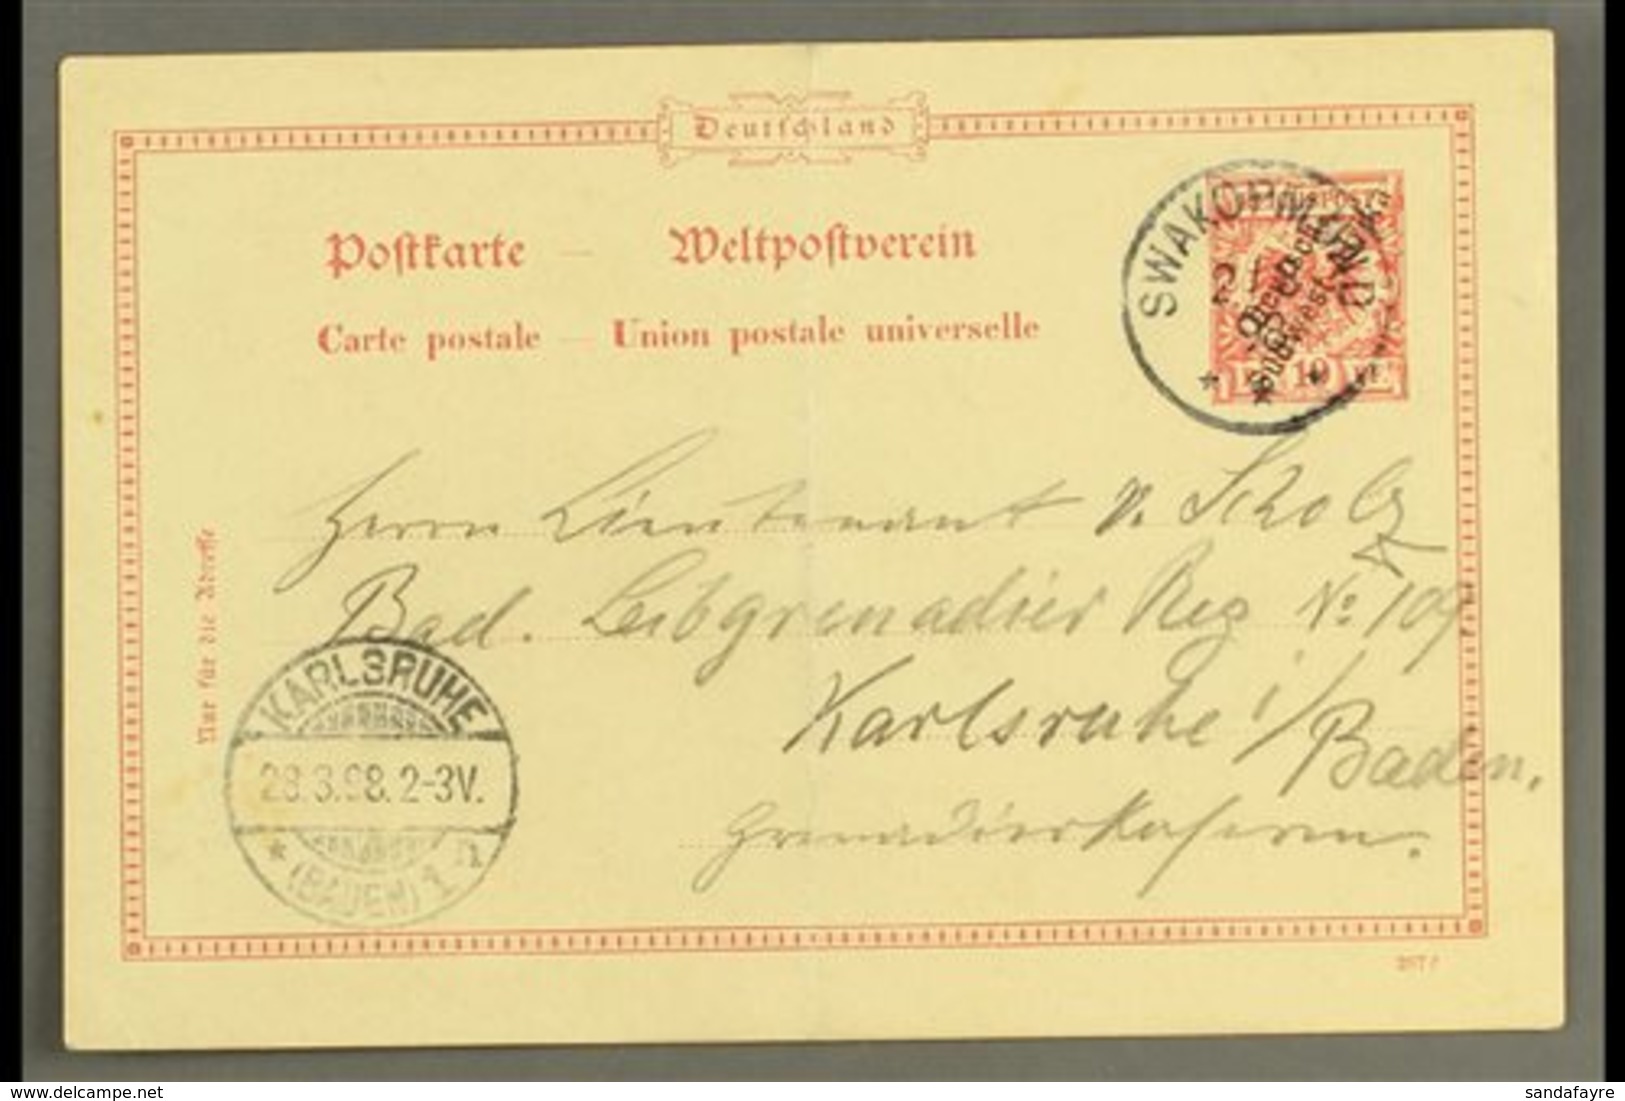 SOUTH WEST AFRICA 1898 (3 Mar) 10pf With Diagonal Opt Postal Stationery Card To Germany Cancelled By Fine "SWAKOPMUND" C - Other & Unclassified